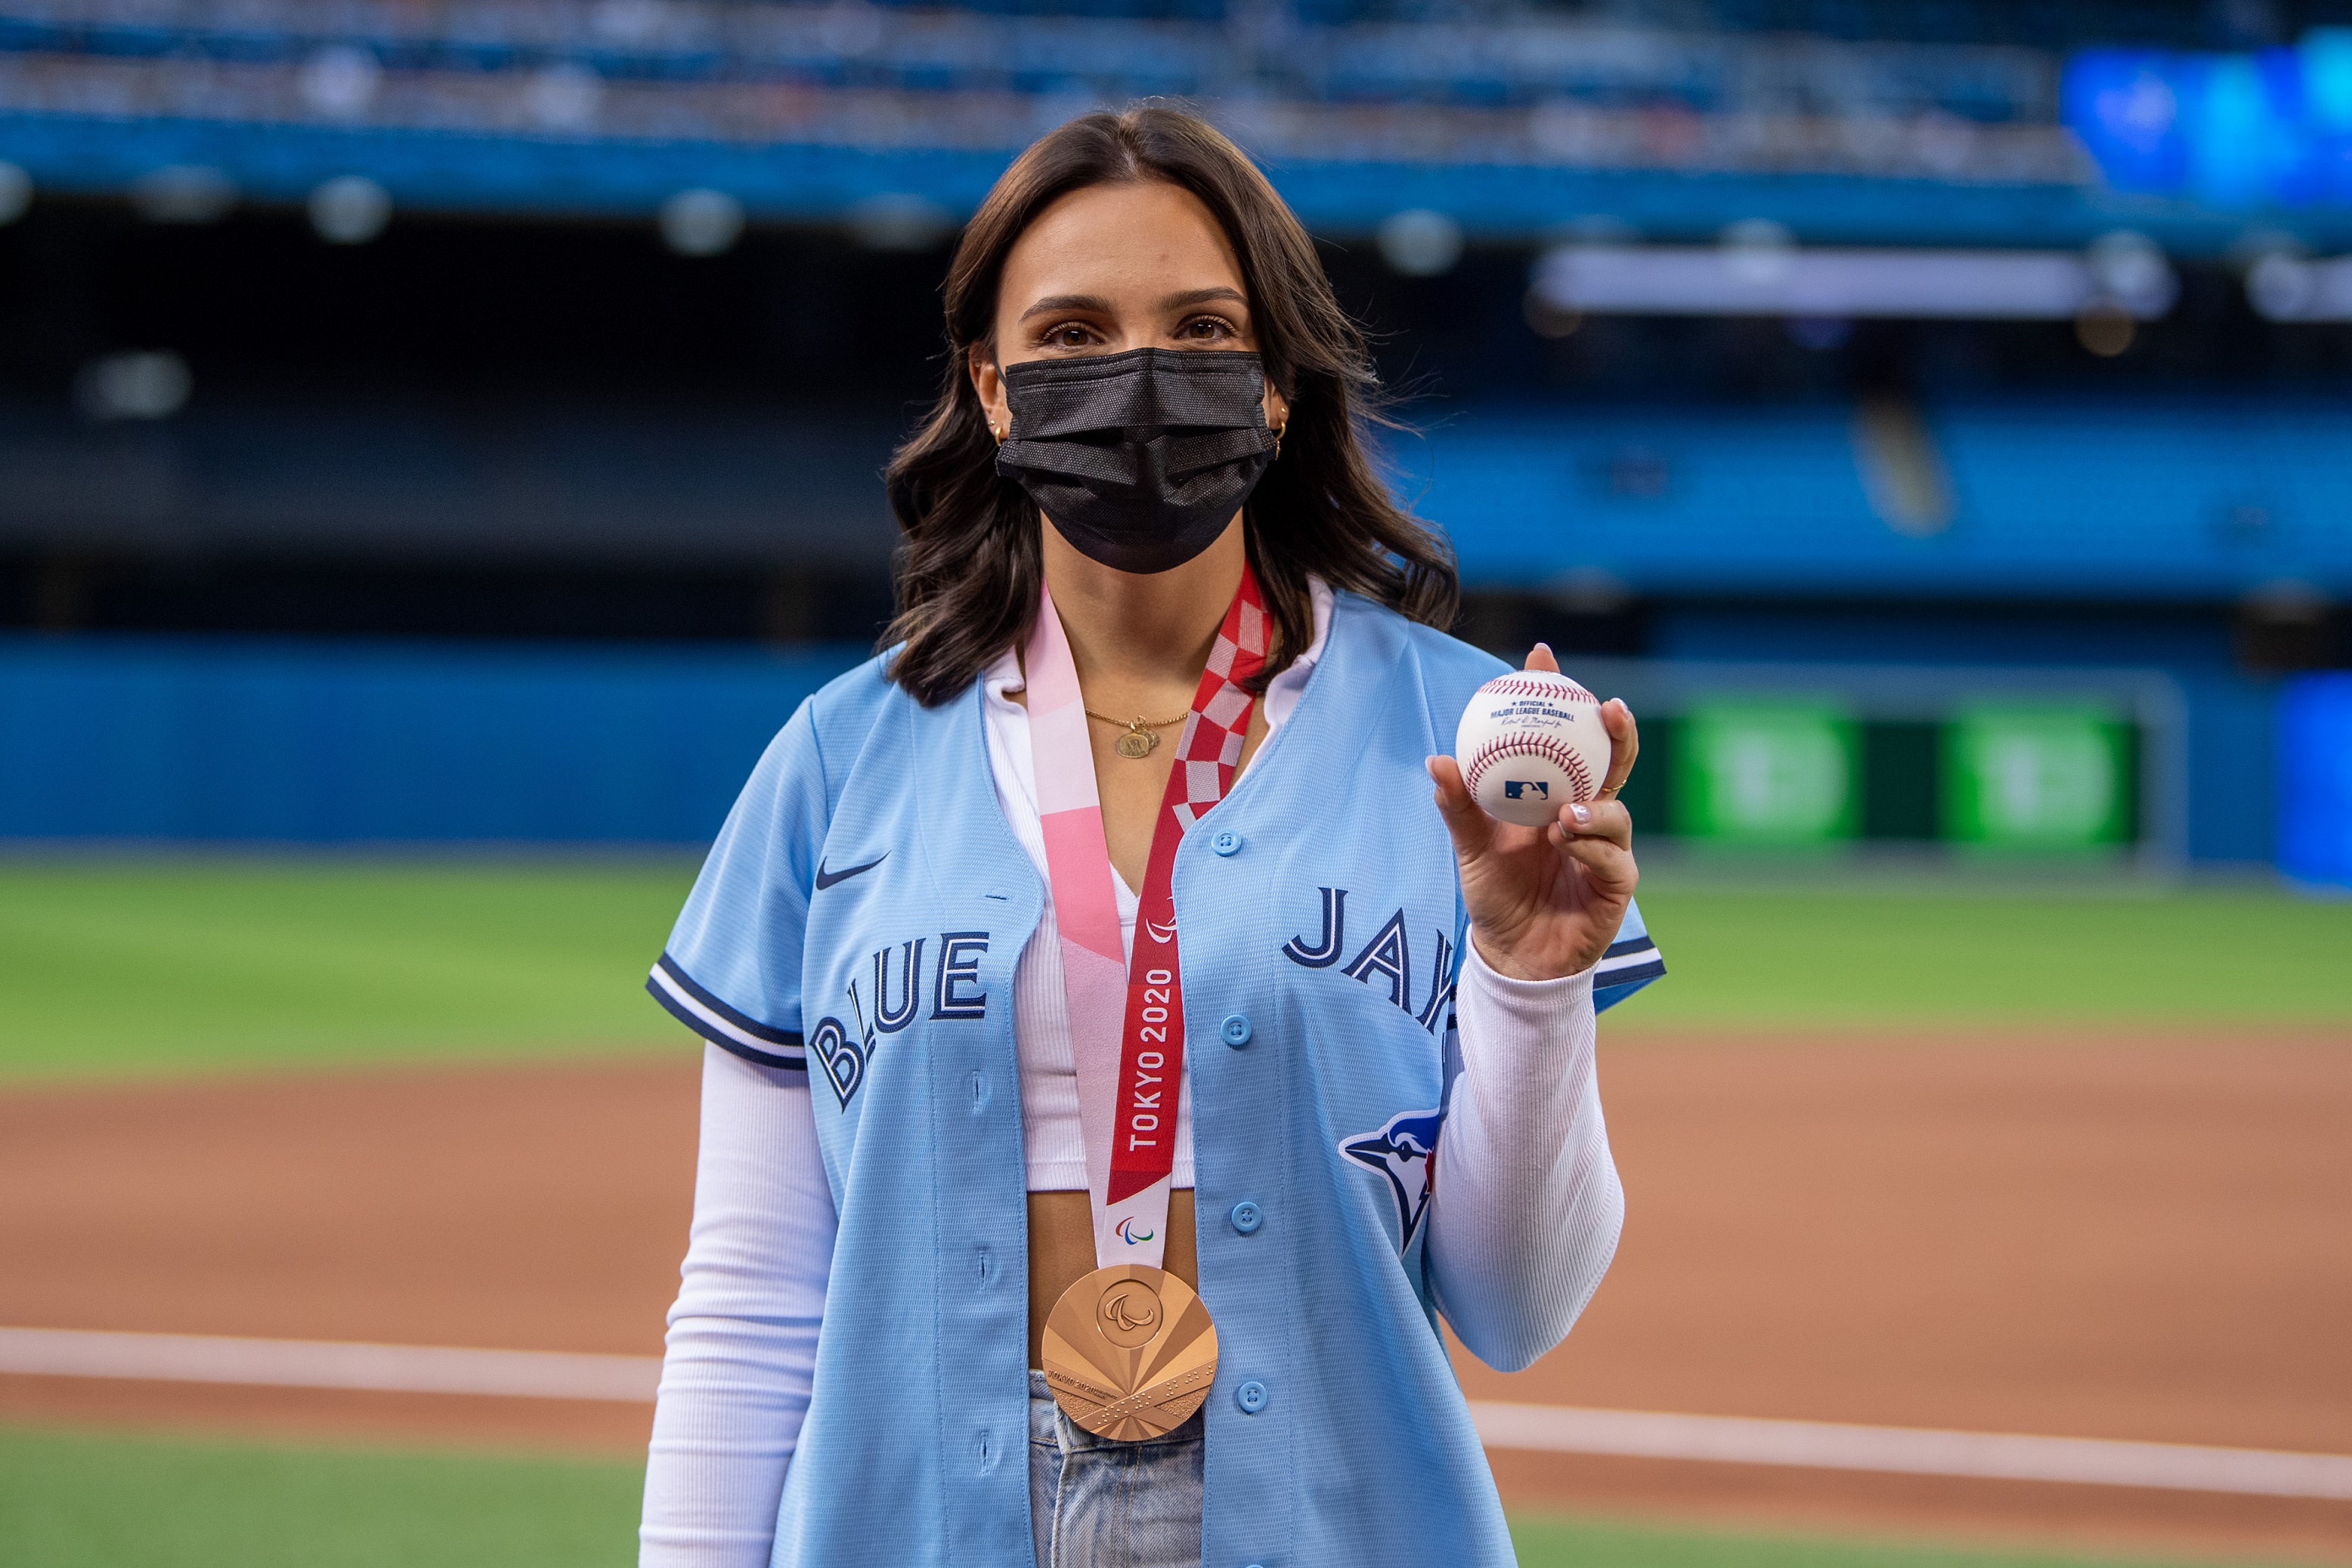 Marissa Papaconstantinou holding a baseball, wearing her bronze medal and a Blue Jays jersey before throwing the first pitch at the Blue Jays game